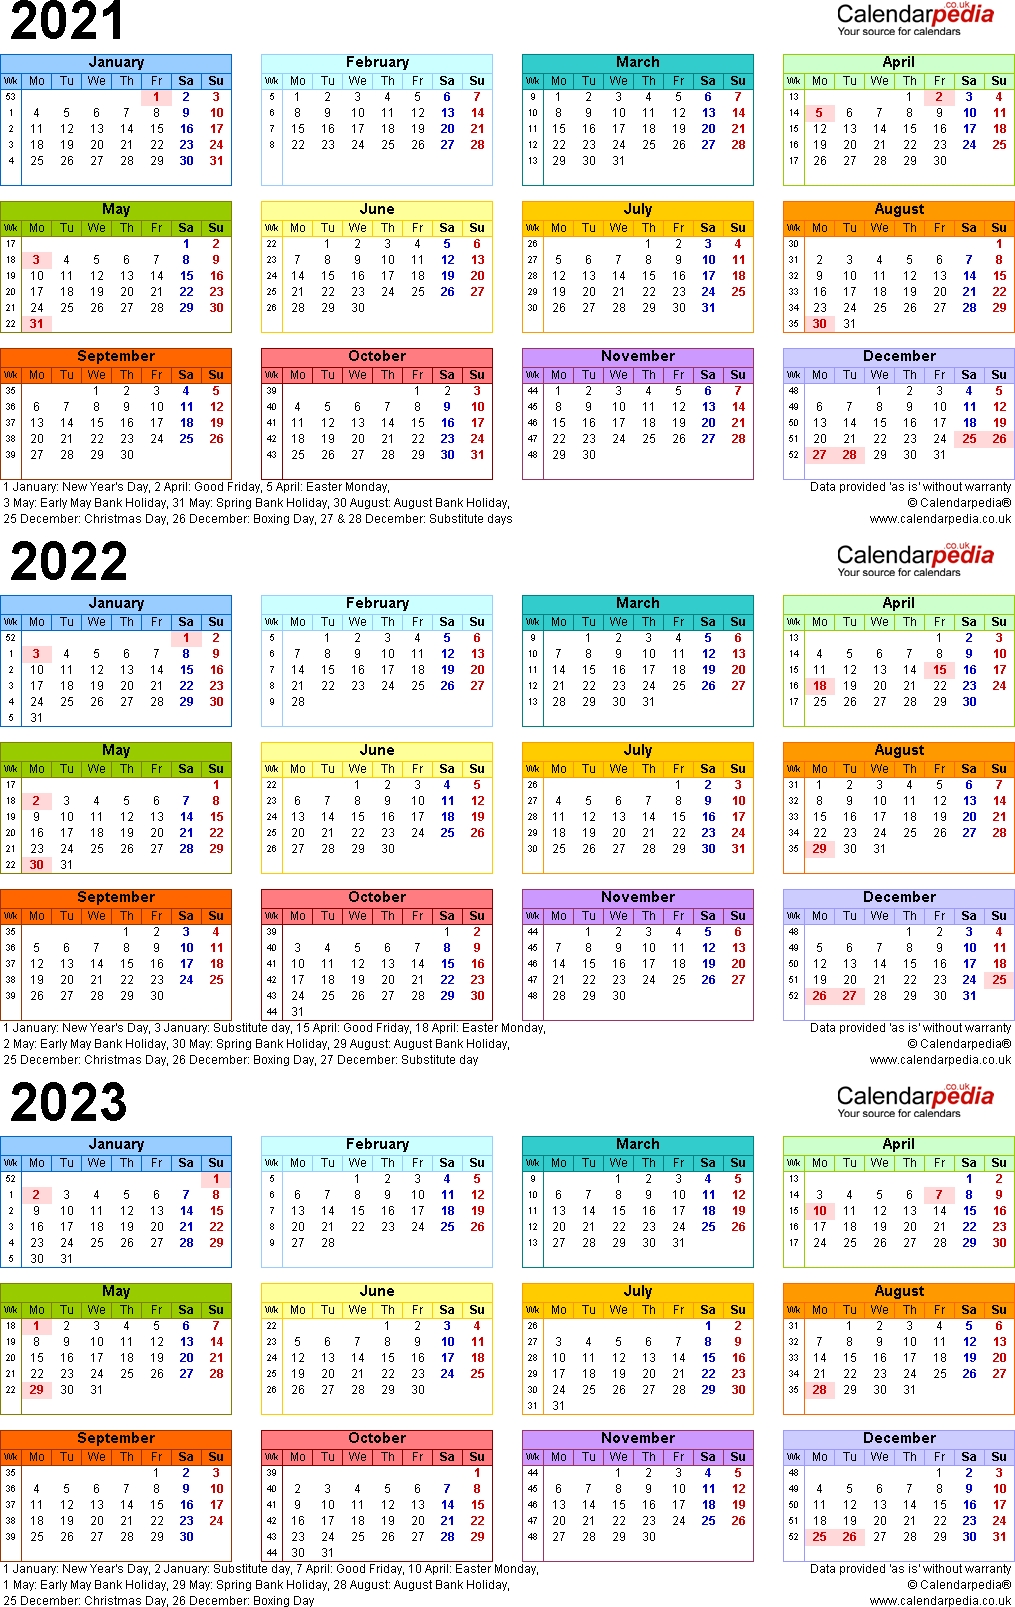 Three Year Calendars For 2021, 2022 &amp; 2023 (Uk) For Word